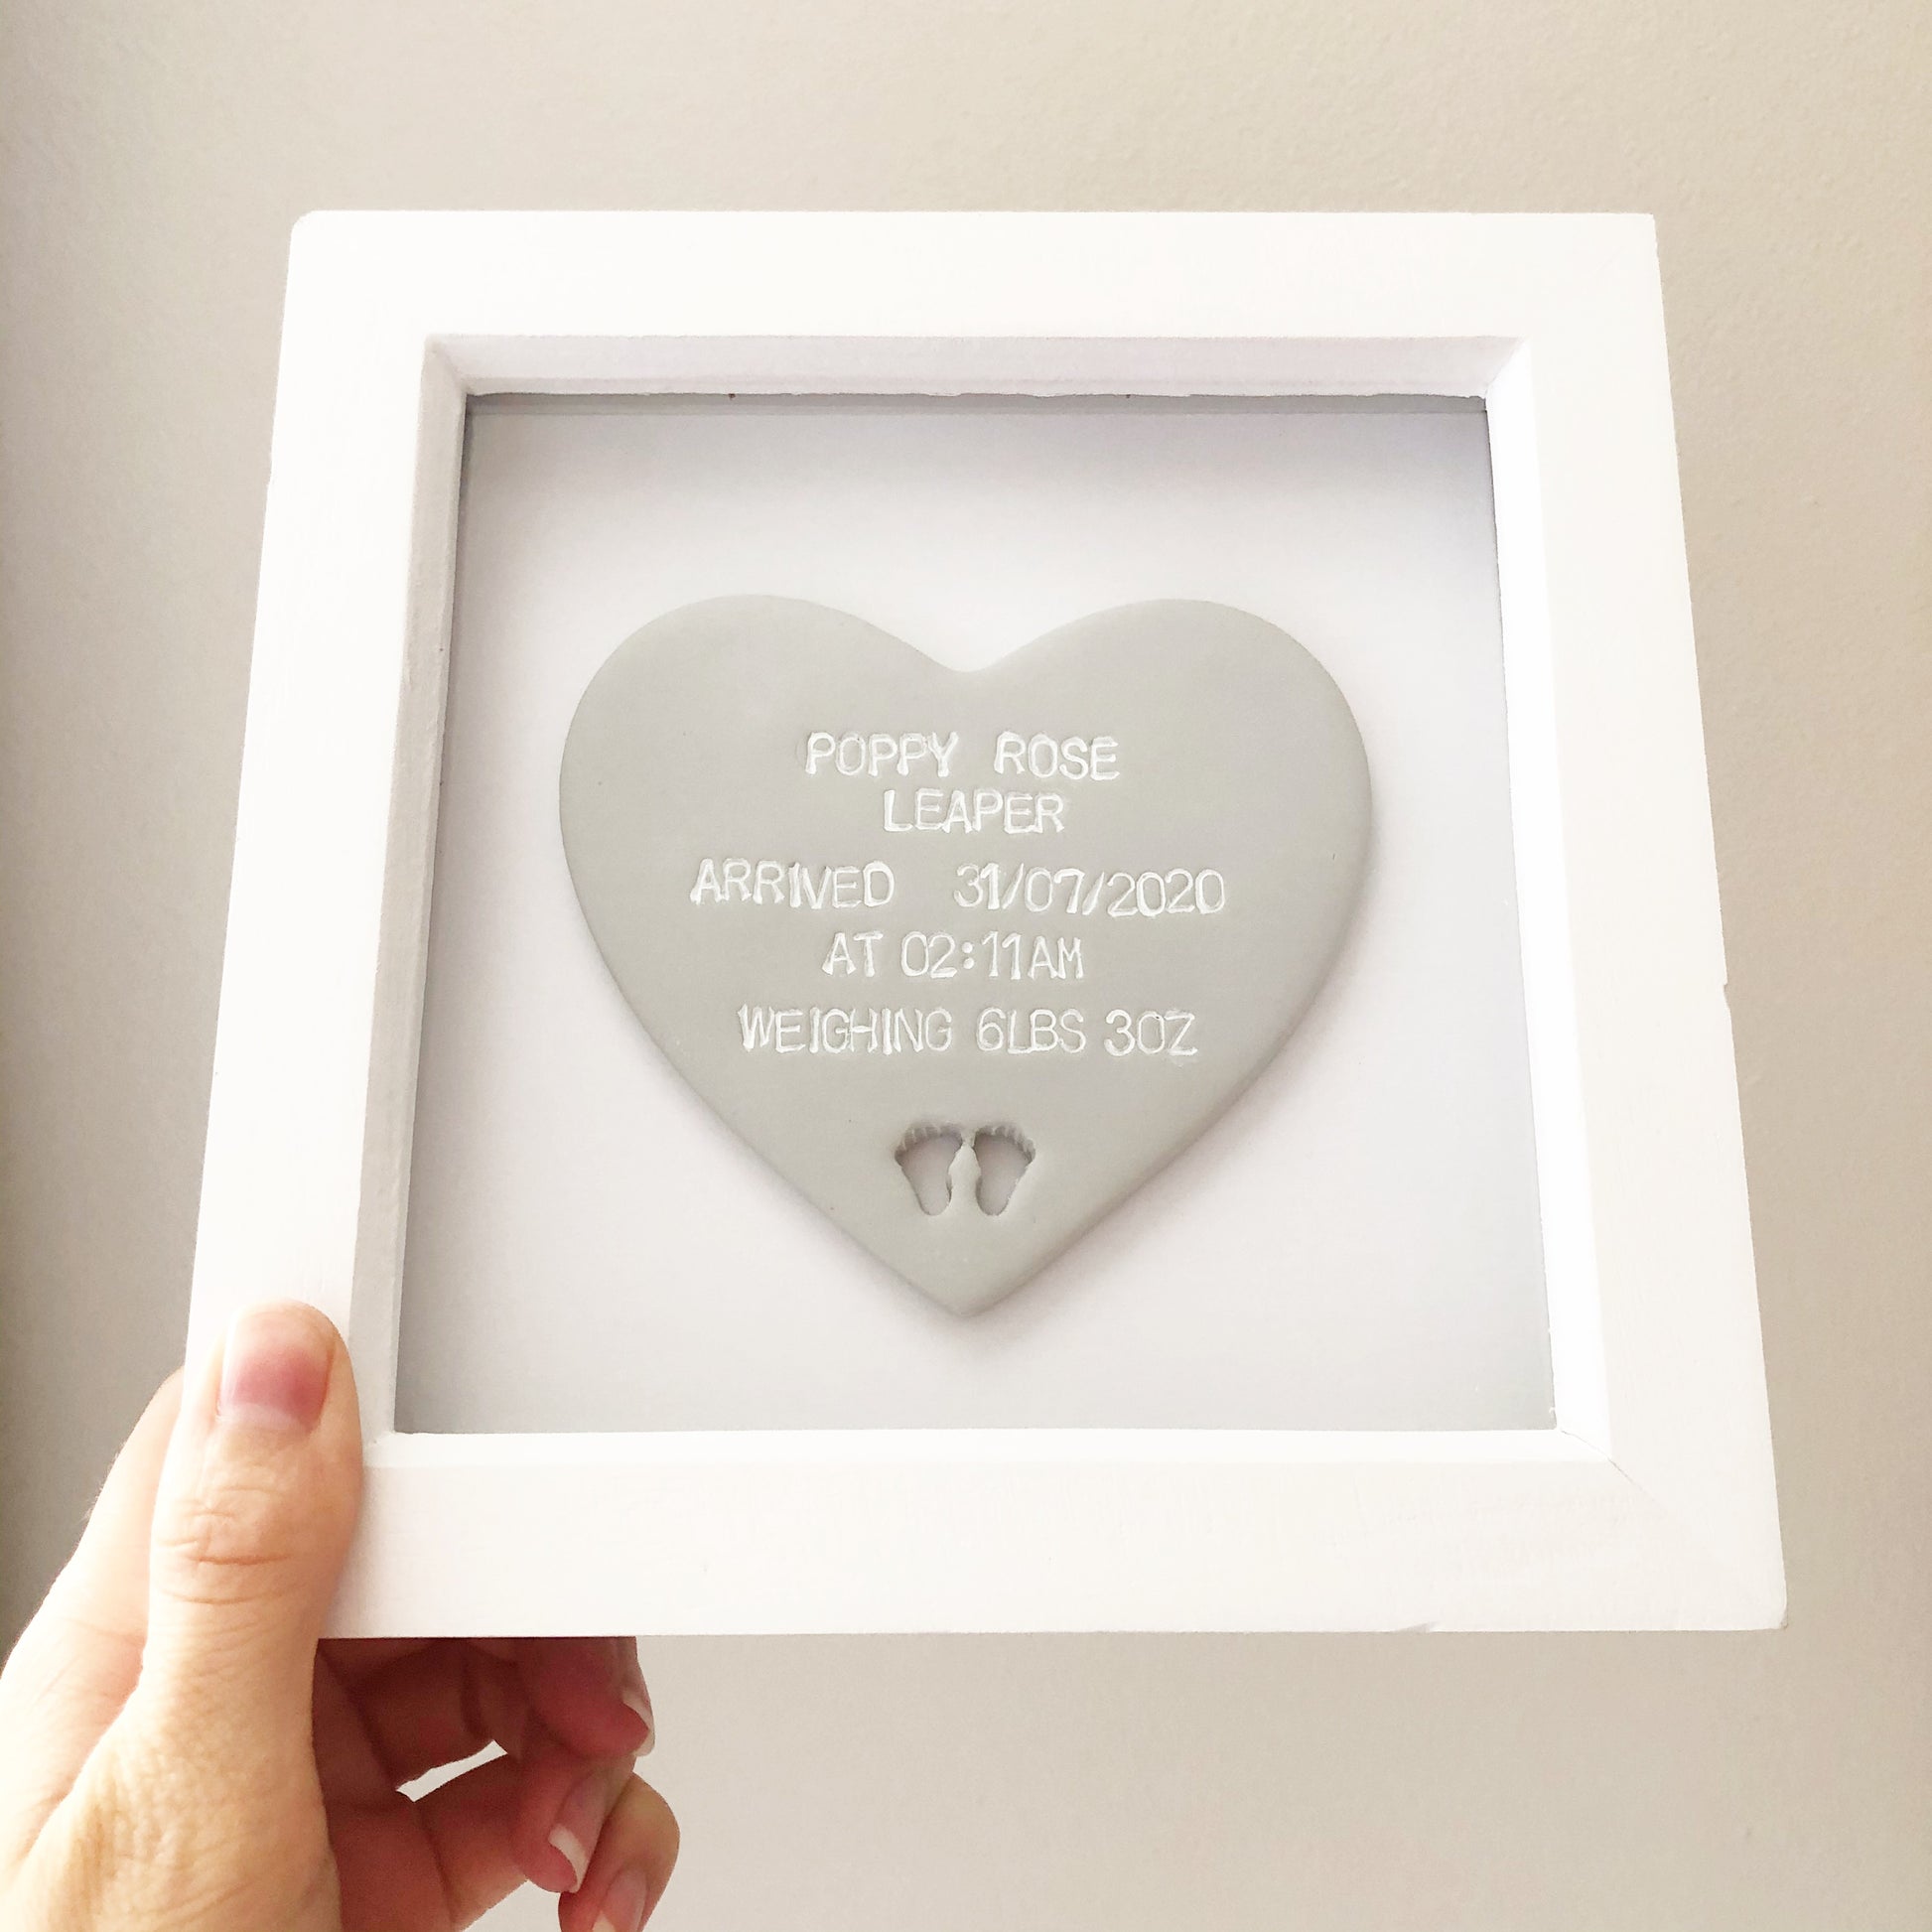 Personalised baby keepsake gift, grey clay heart with baby feet cut out at the bottom of the heart in a white box frame, the heart is personalised with the baby’s name, date of birth, weight and time